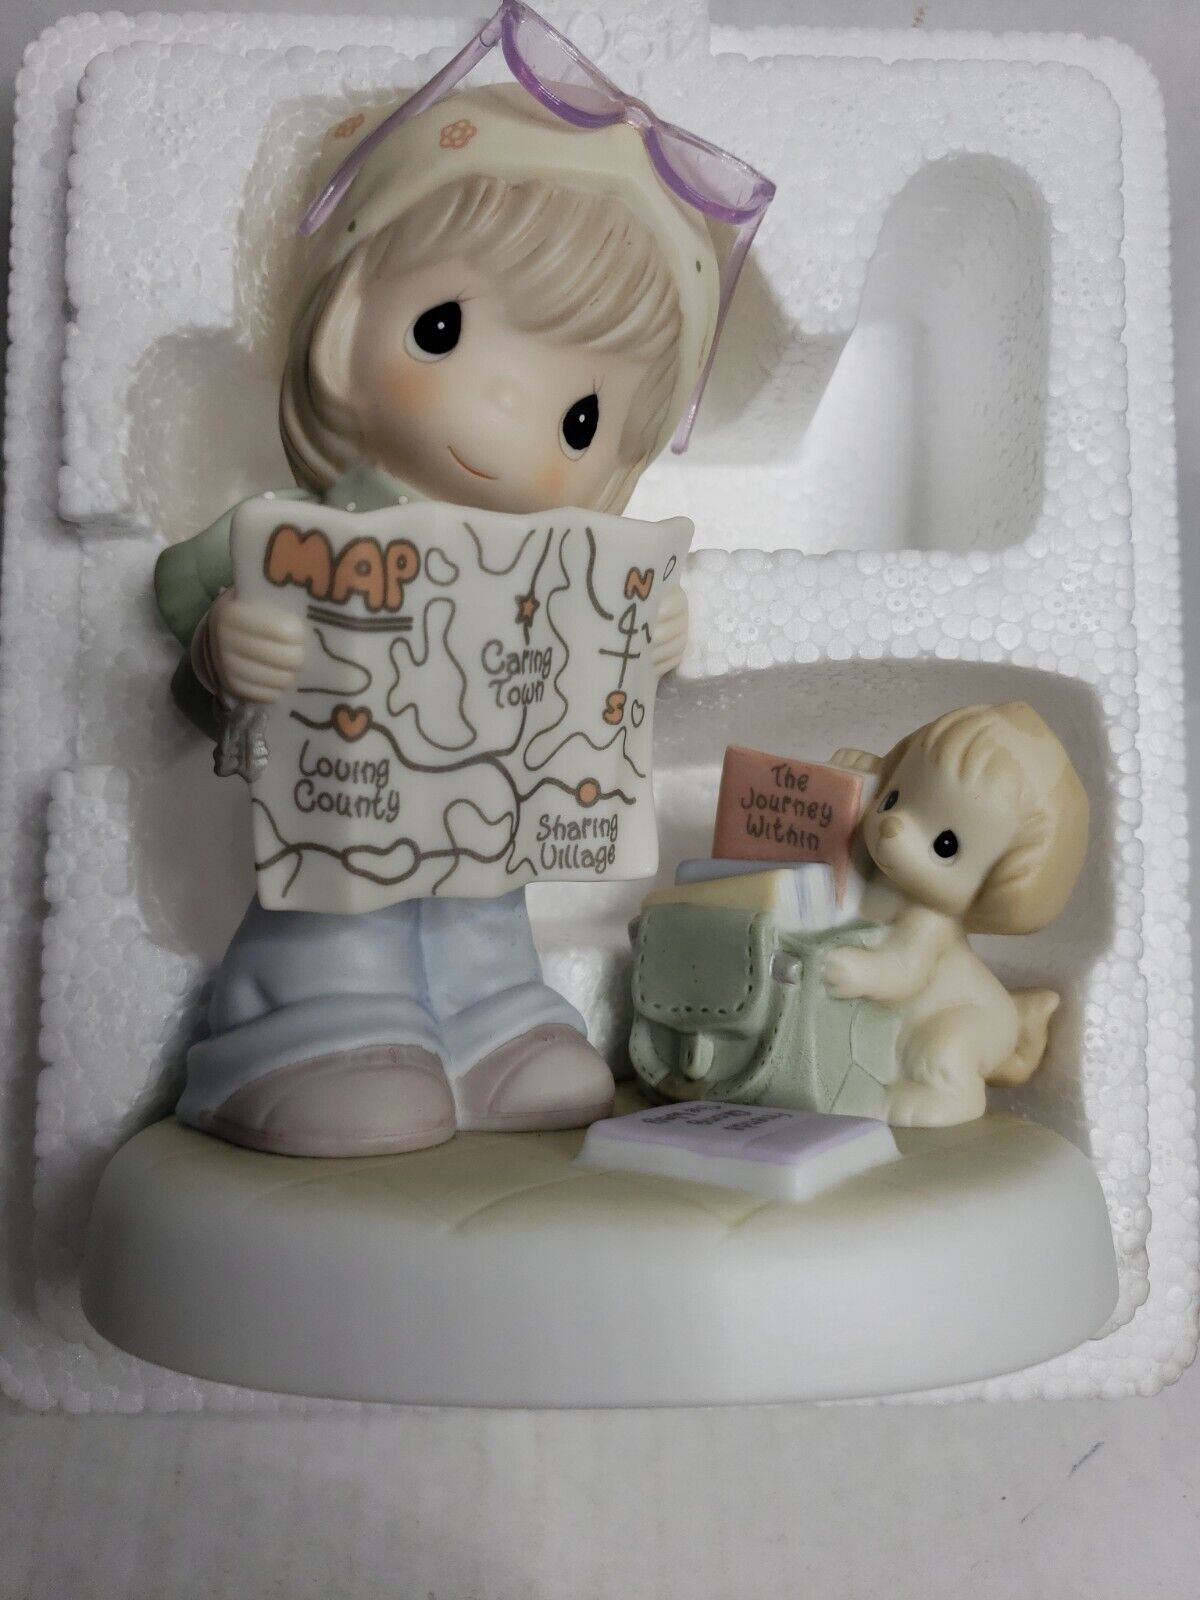 Precious Moments 2004 Figurine Map A Route Toward Loving Caring And Sharing